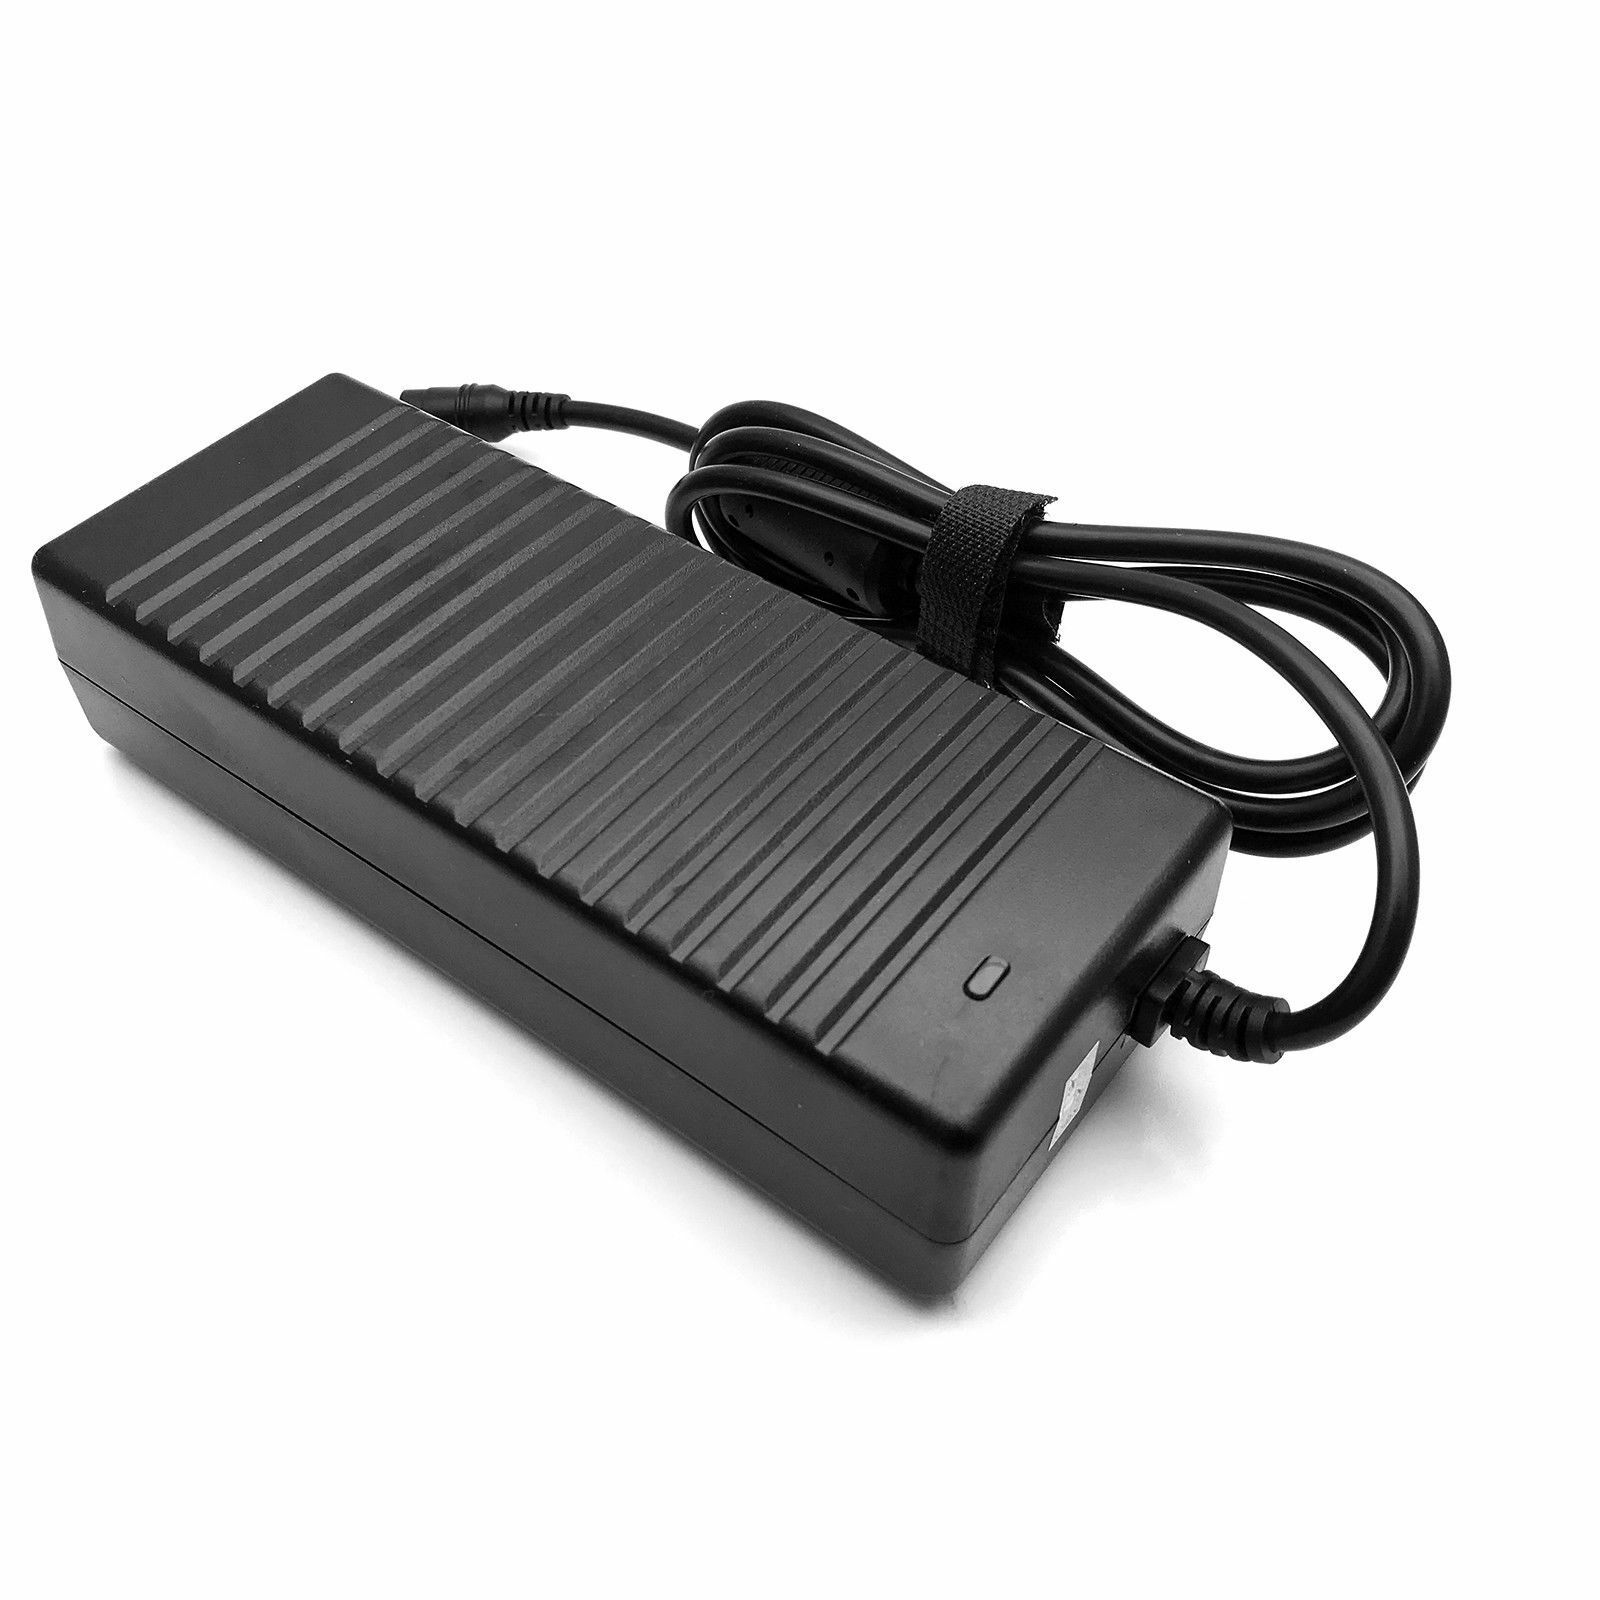 15.6V AC Adapter Charger For Panasonic Toughbook CF-19 CF31 CF52 CF-53 CF-53S - image 5 of 5